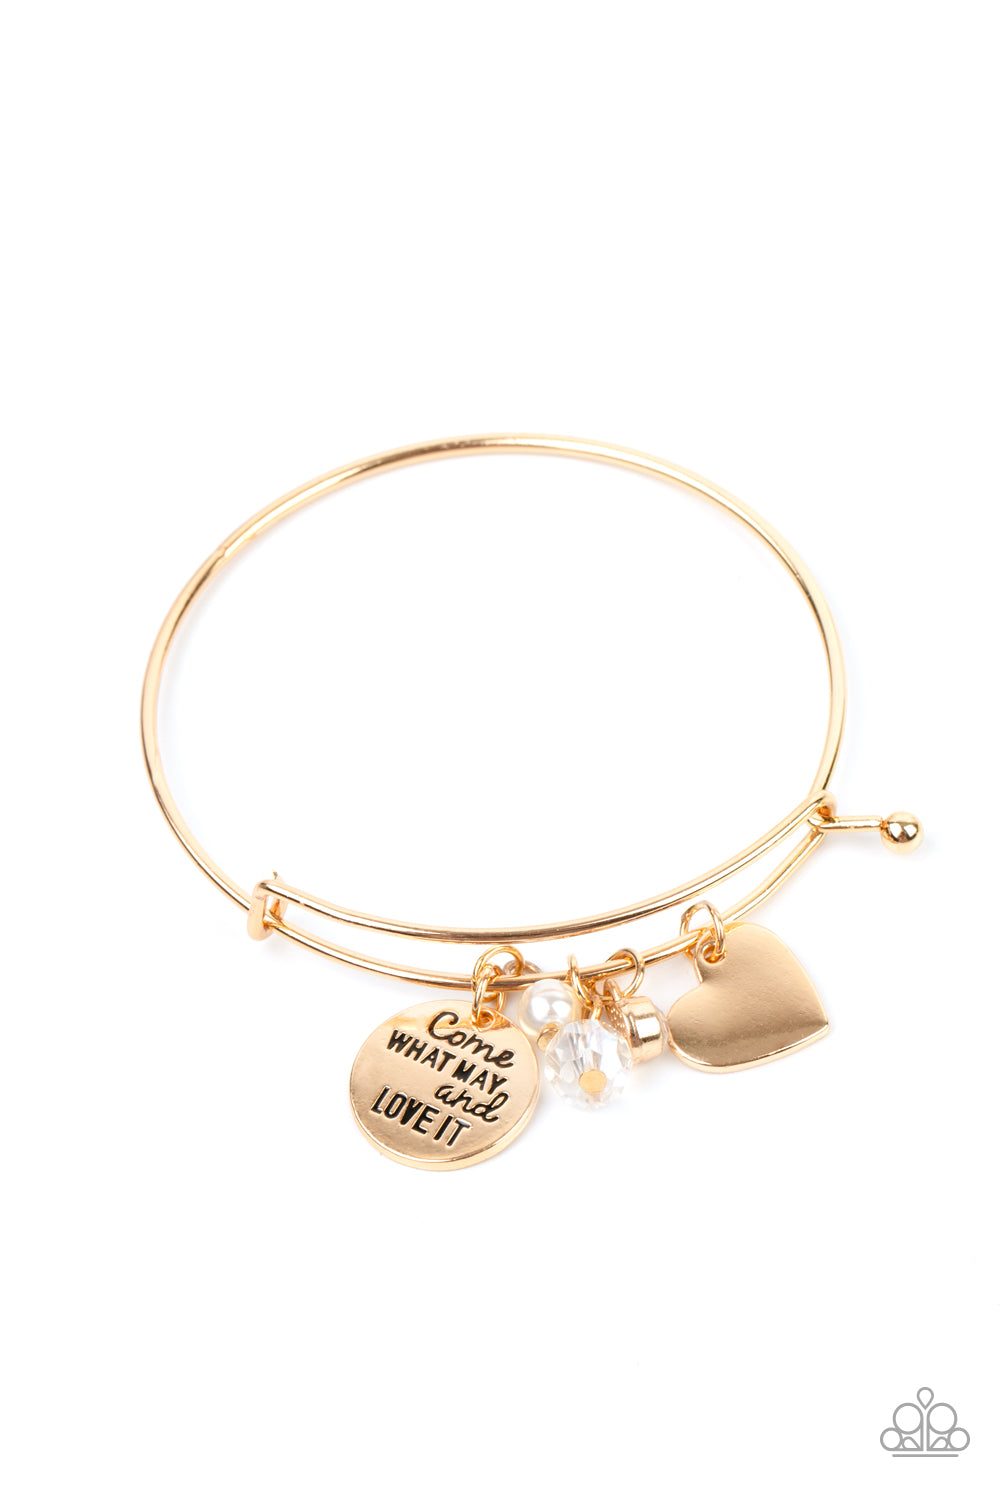 PRE-ORDER - Come What May and Love It - Gold - Paparazzi Bracelet